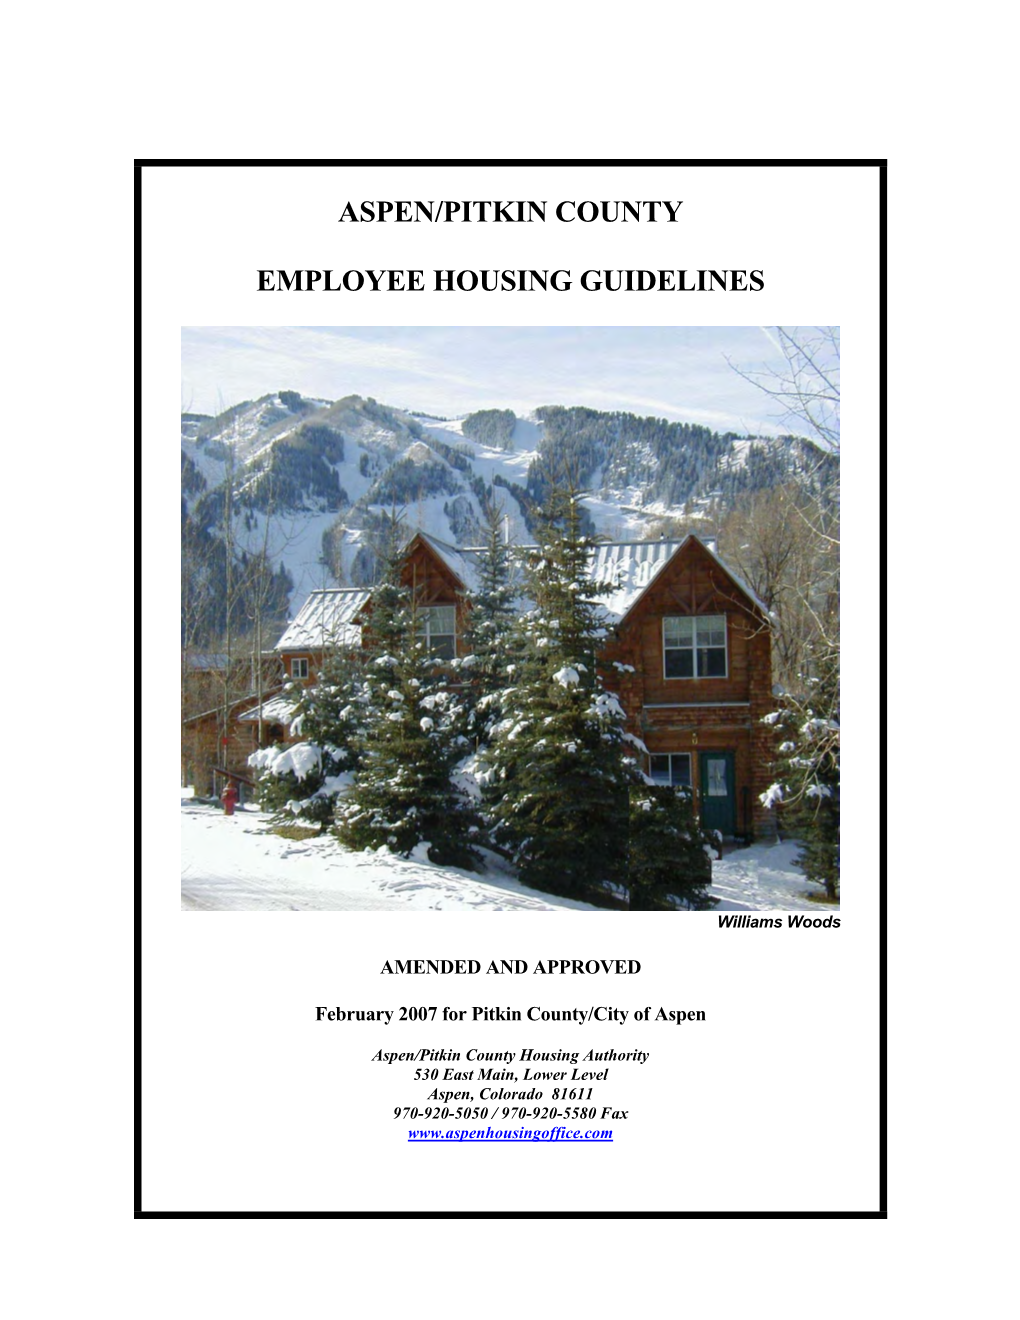 Aspen/Pitkin County Employee Housing Guidelines AMENDED/APPROVED 02/07 Page 1 of 68